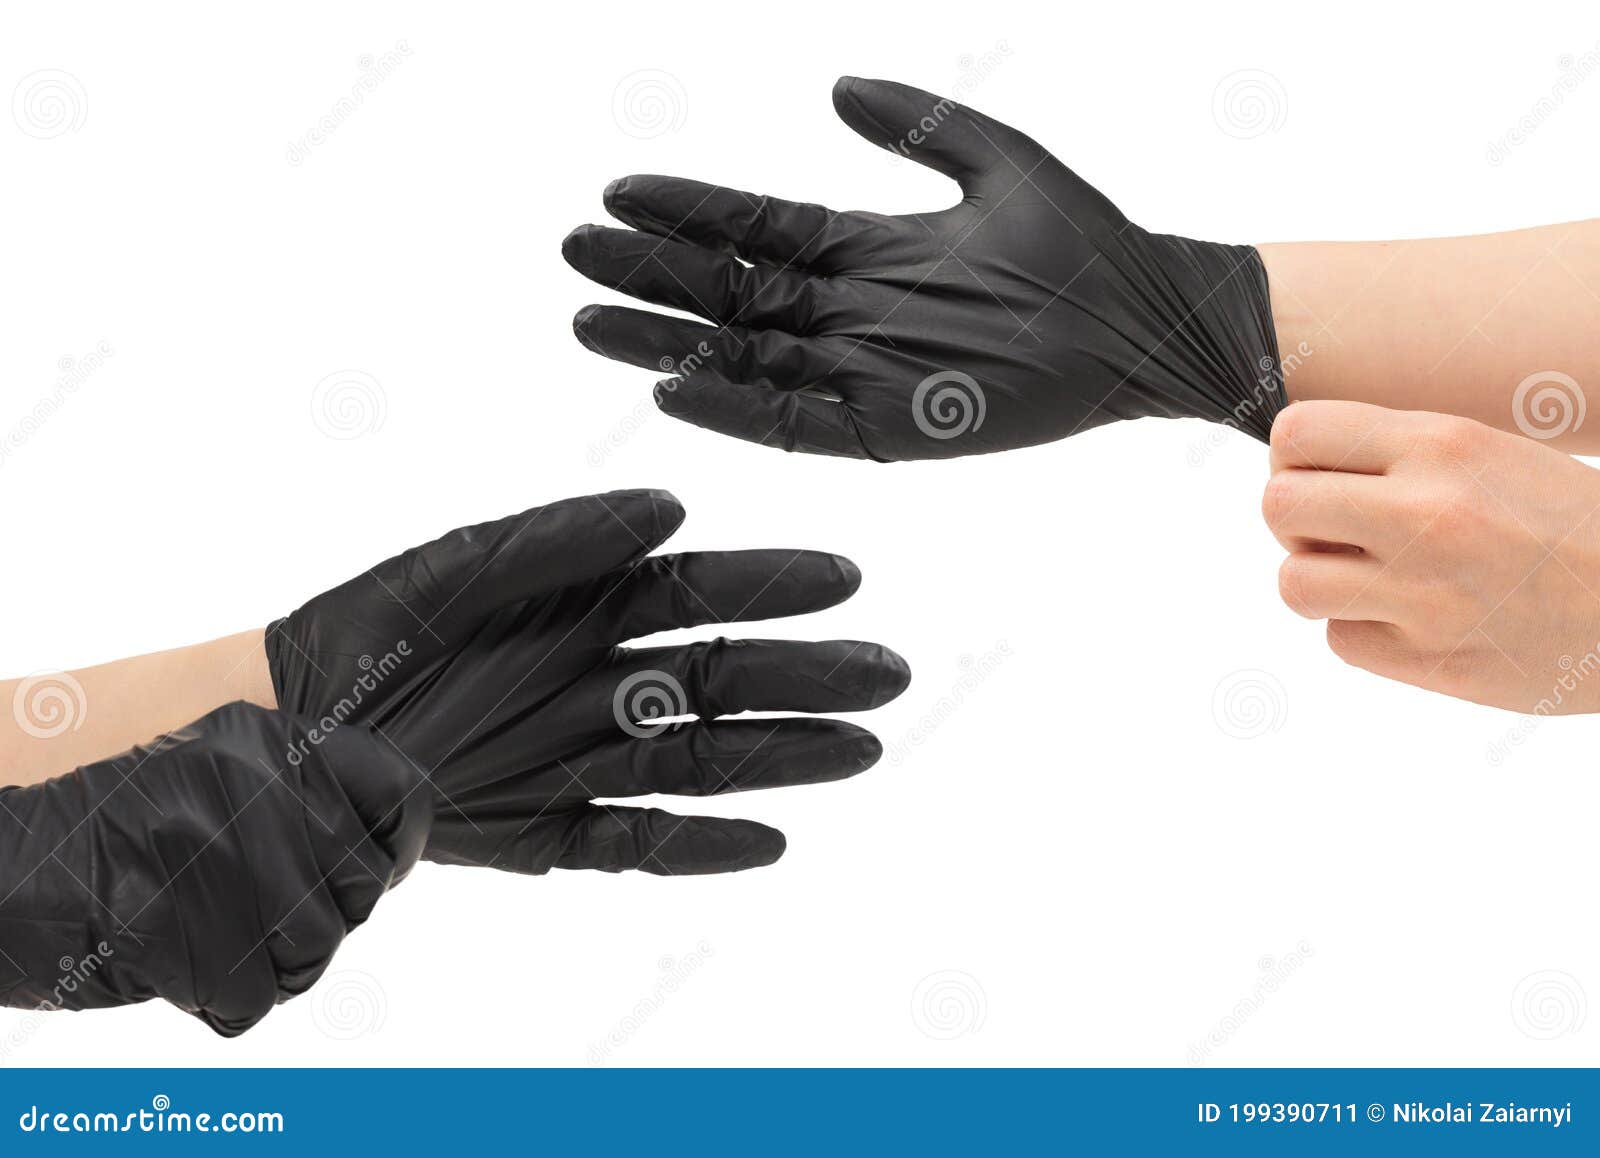 woman puts on black rubber gloves